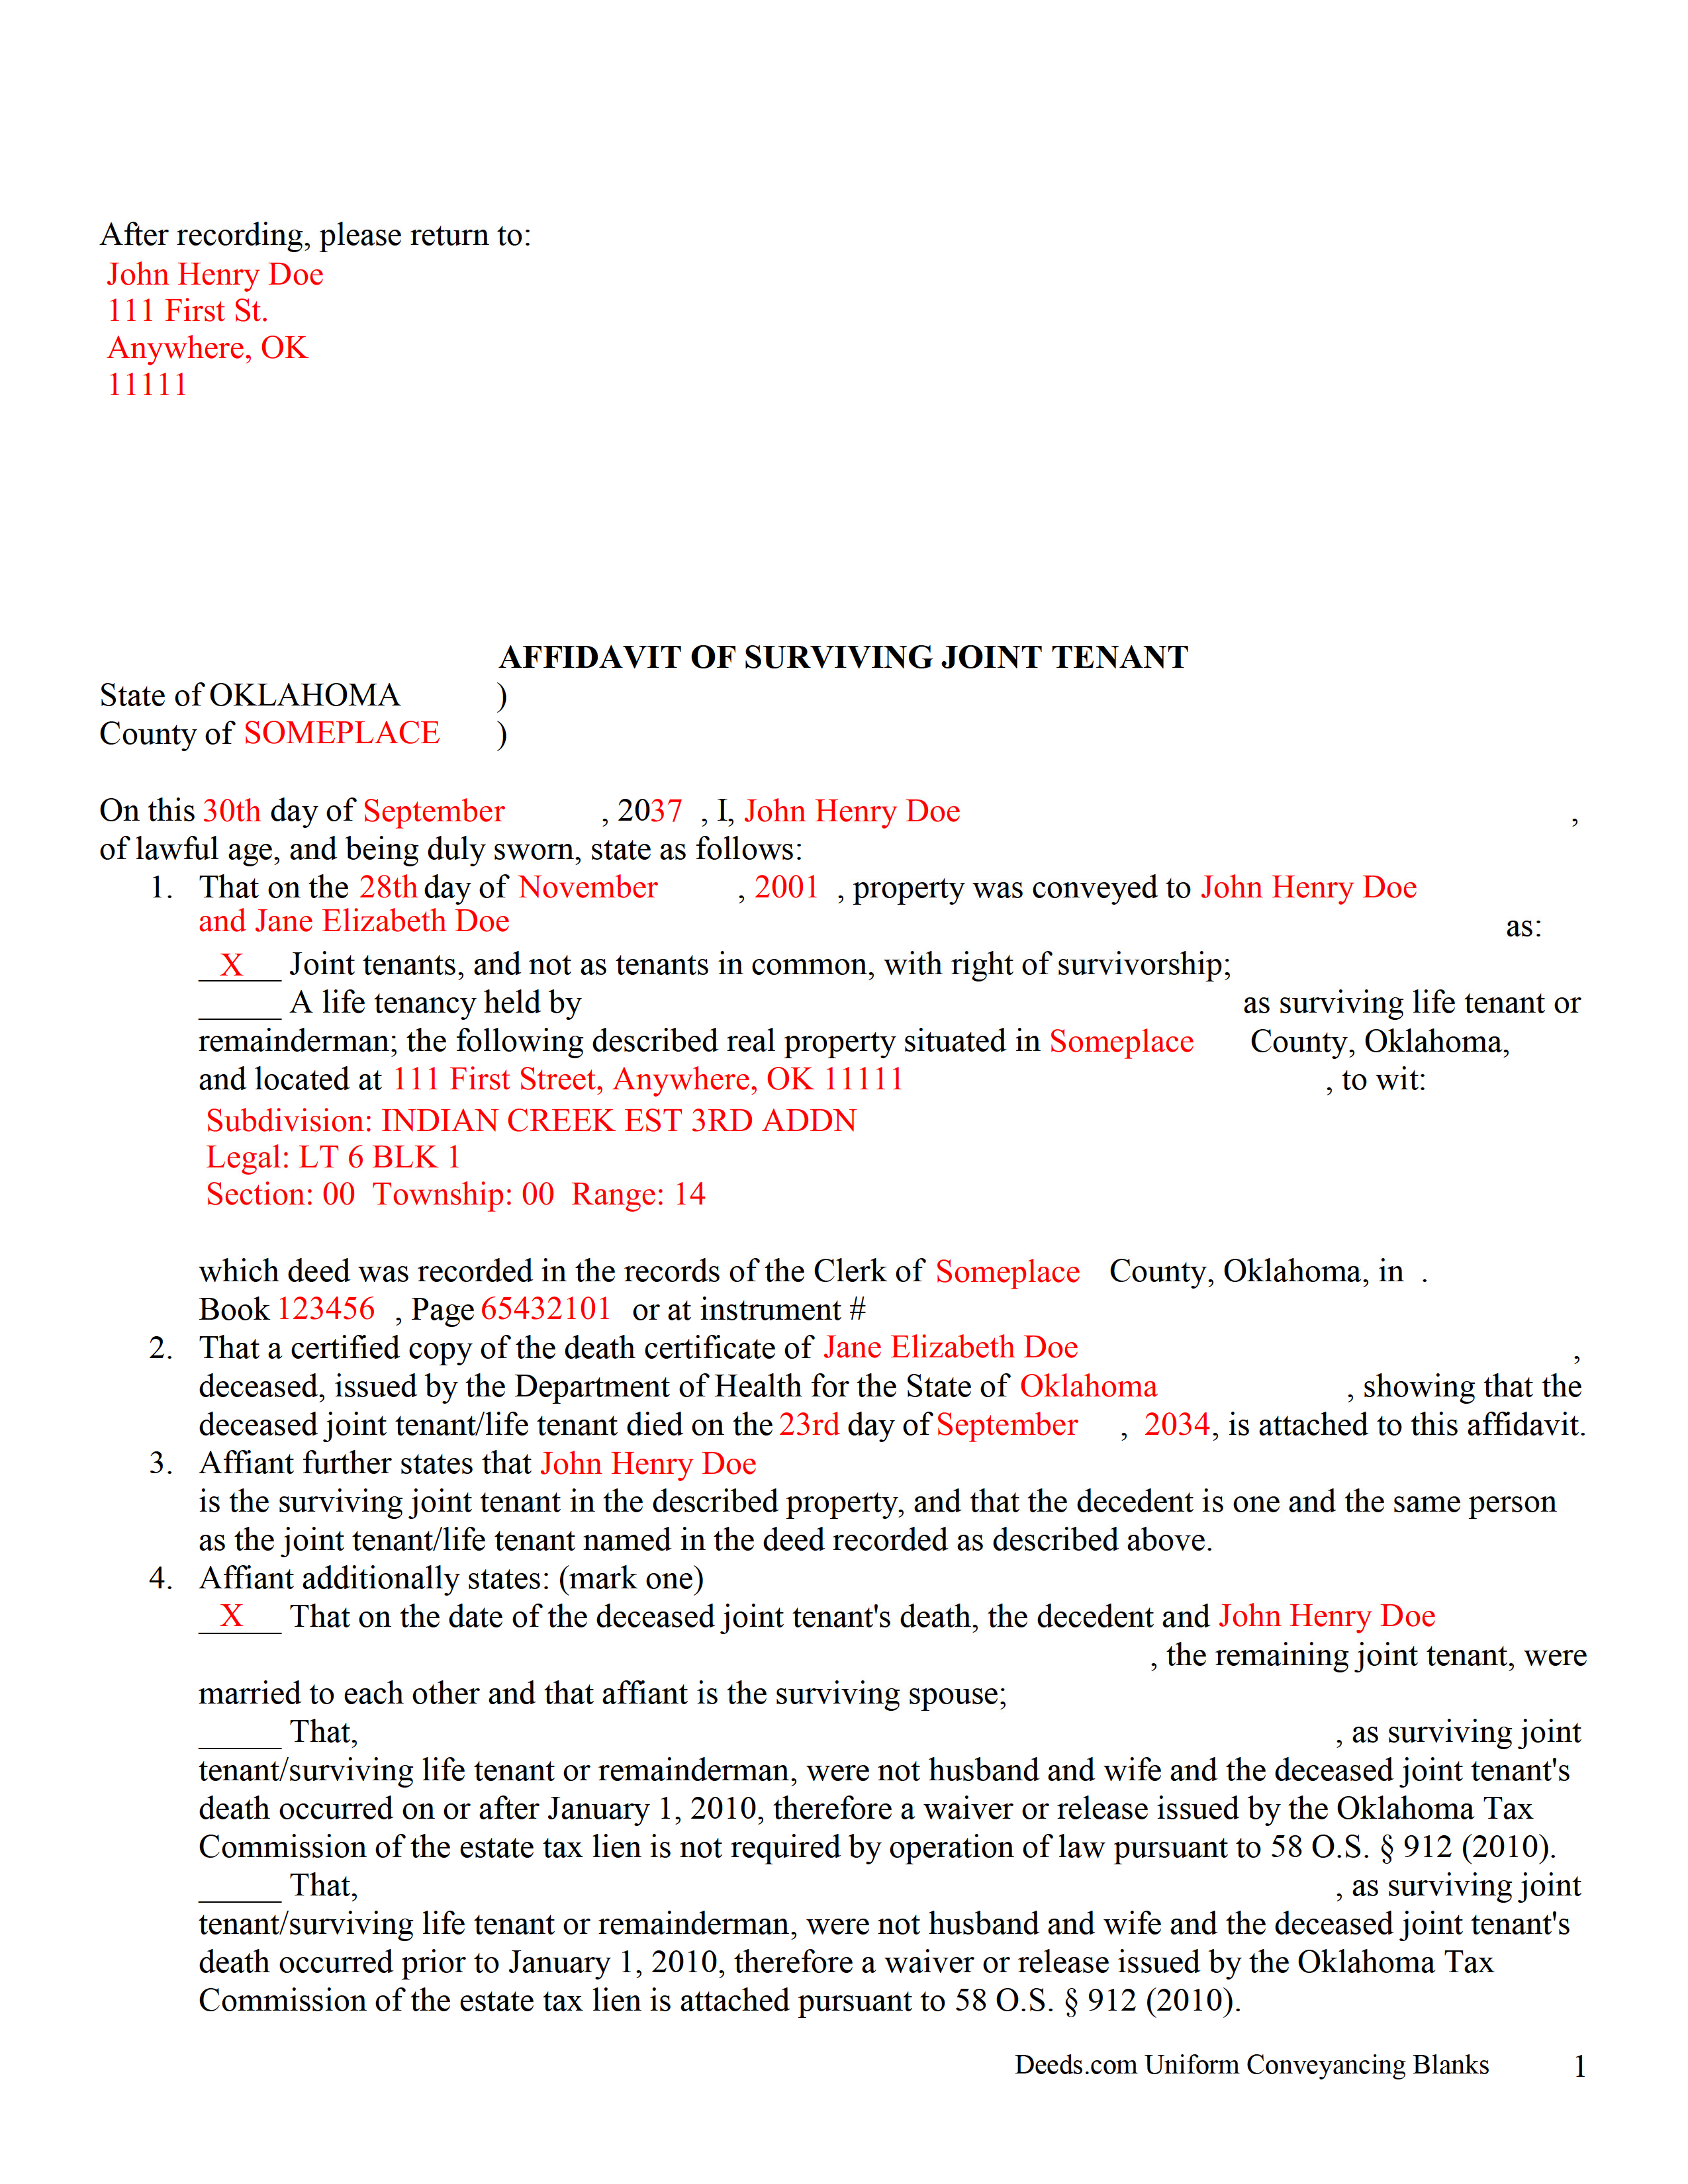 Completed Example of the Affidavit of Surviving Joint Tenant Document